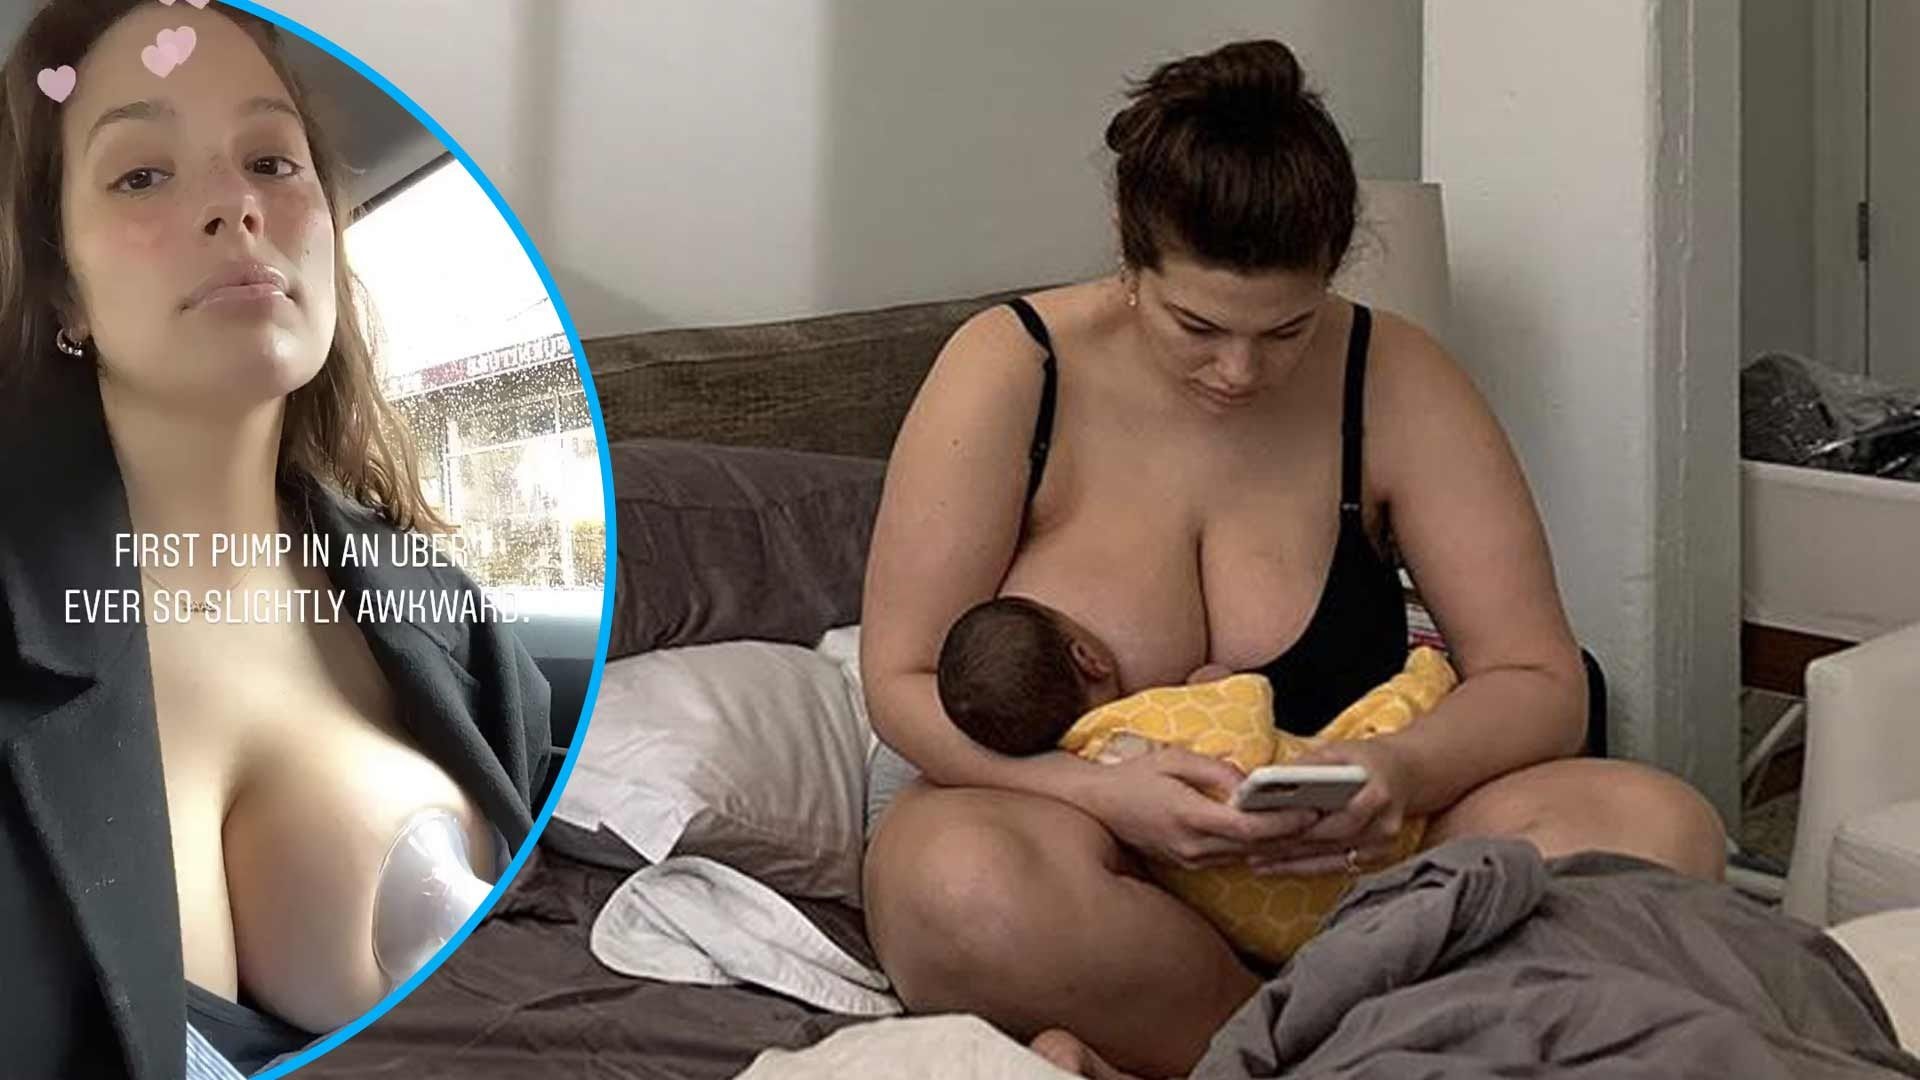 Ashley Graham proves she is a multitasking mom as she shares her 'first pump in an Uber' on Instagram